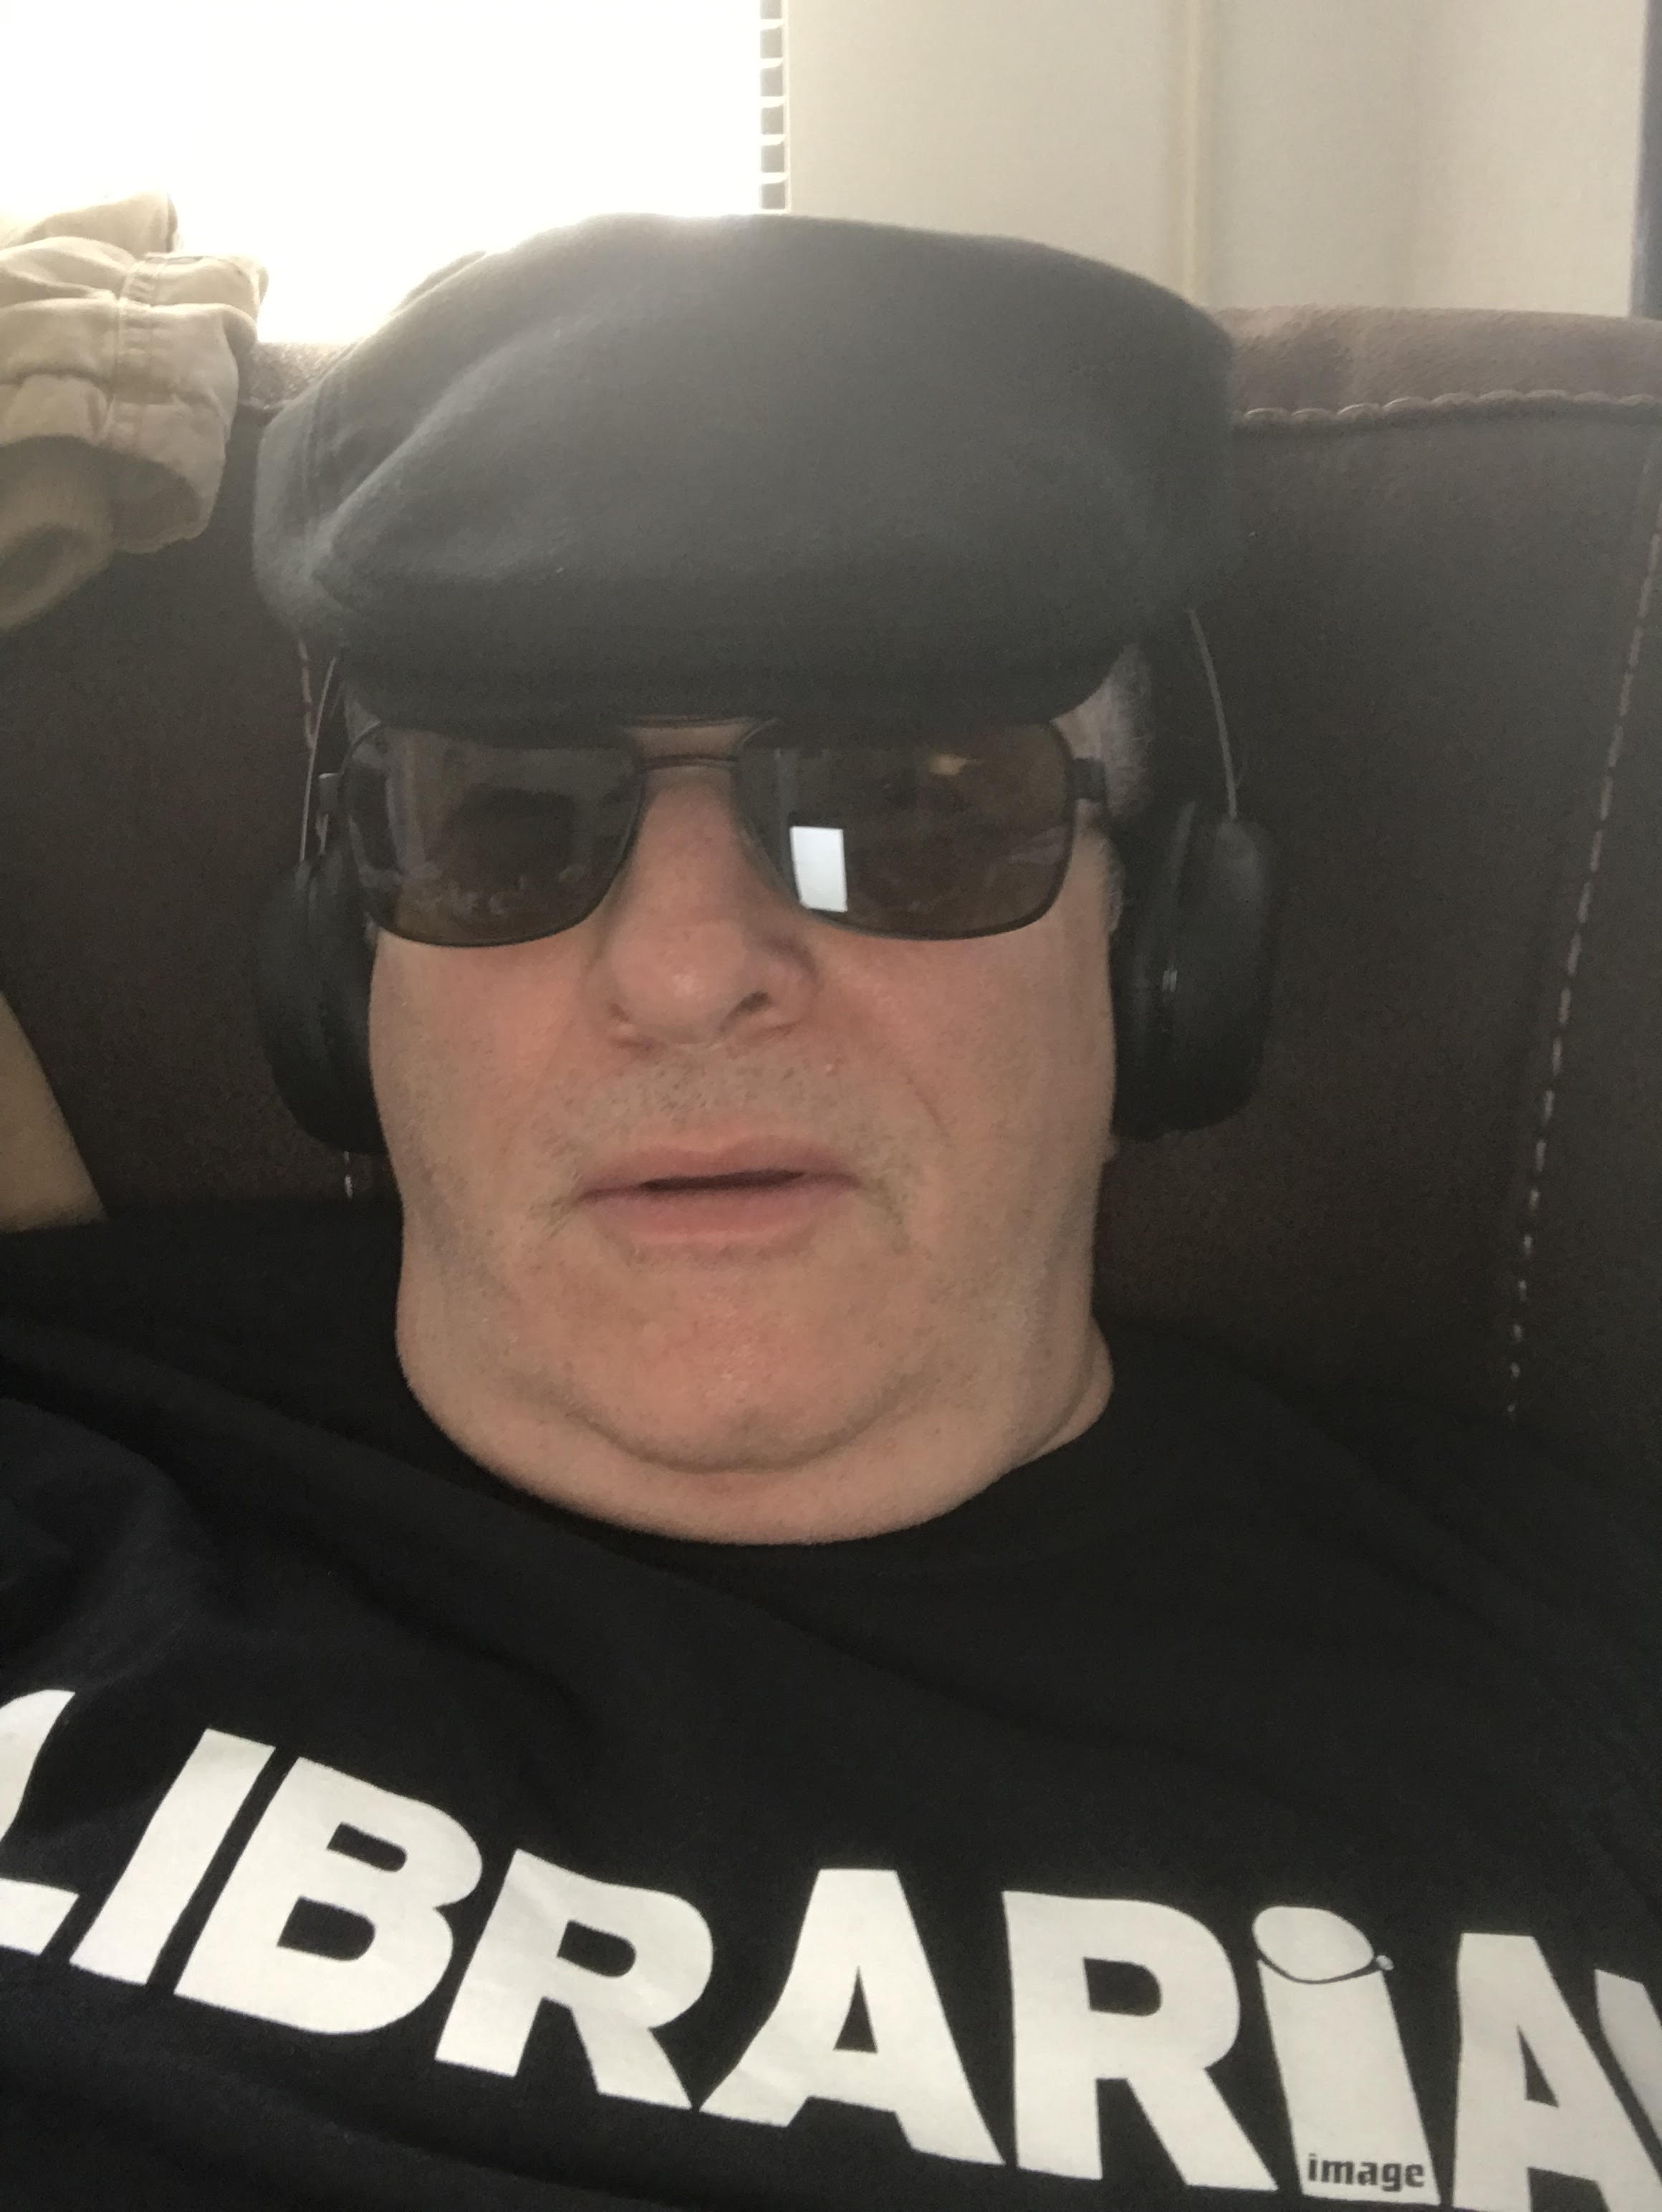 Photo of Mark Harryman, wearing a shirt with the word "Librarian"